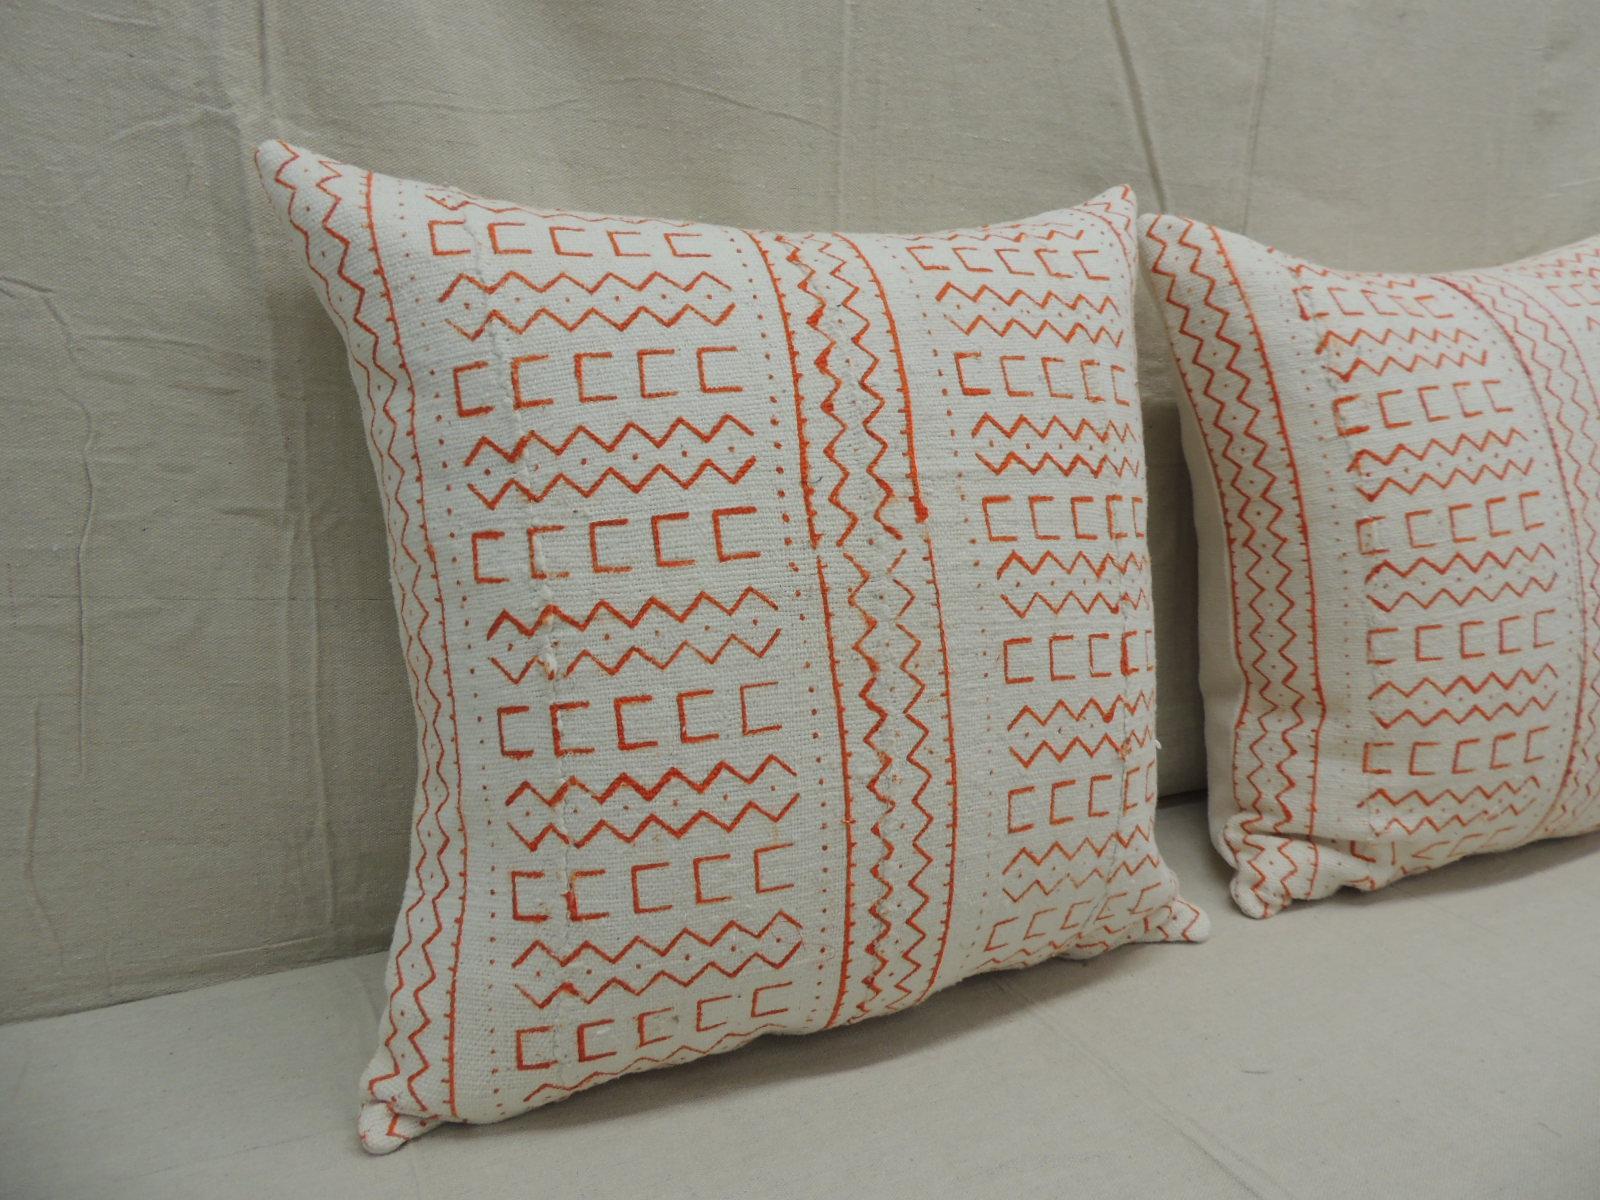 Pair of vintage orange and natural African mud cloth square decorative pillows
with textured white heavy linen backings.
Decorative pillow handcrafted and designed in the USA. 
Closure by stitch (no zipper closure) with custom made pillow